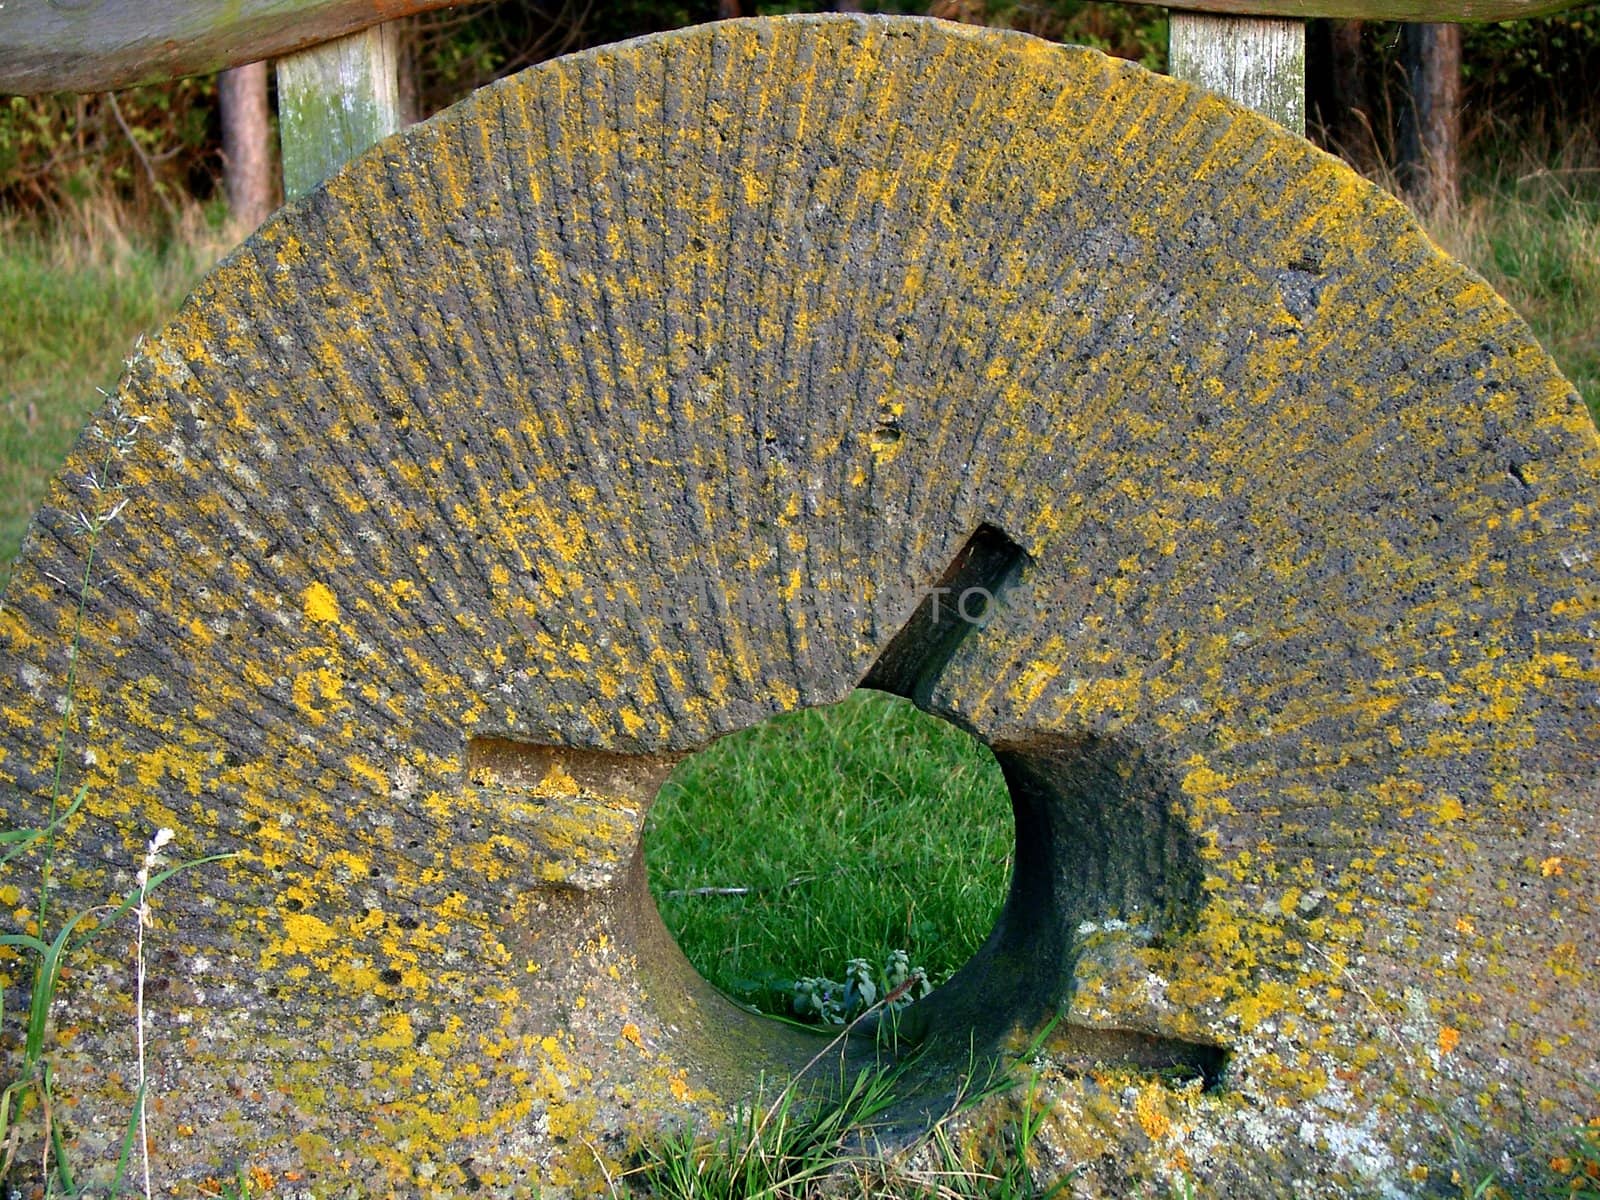 Old millstone coated with yellow lichen.